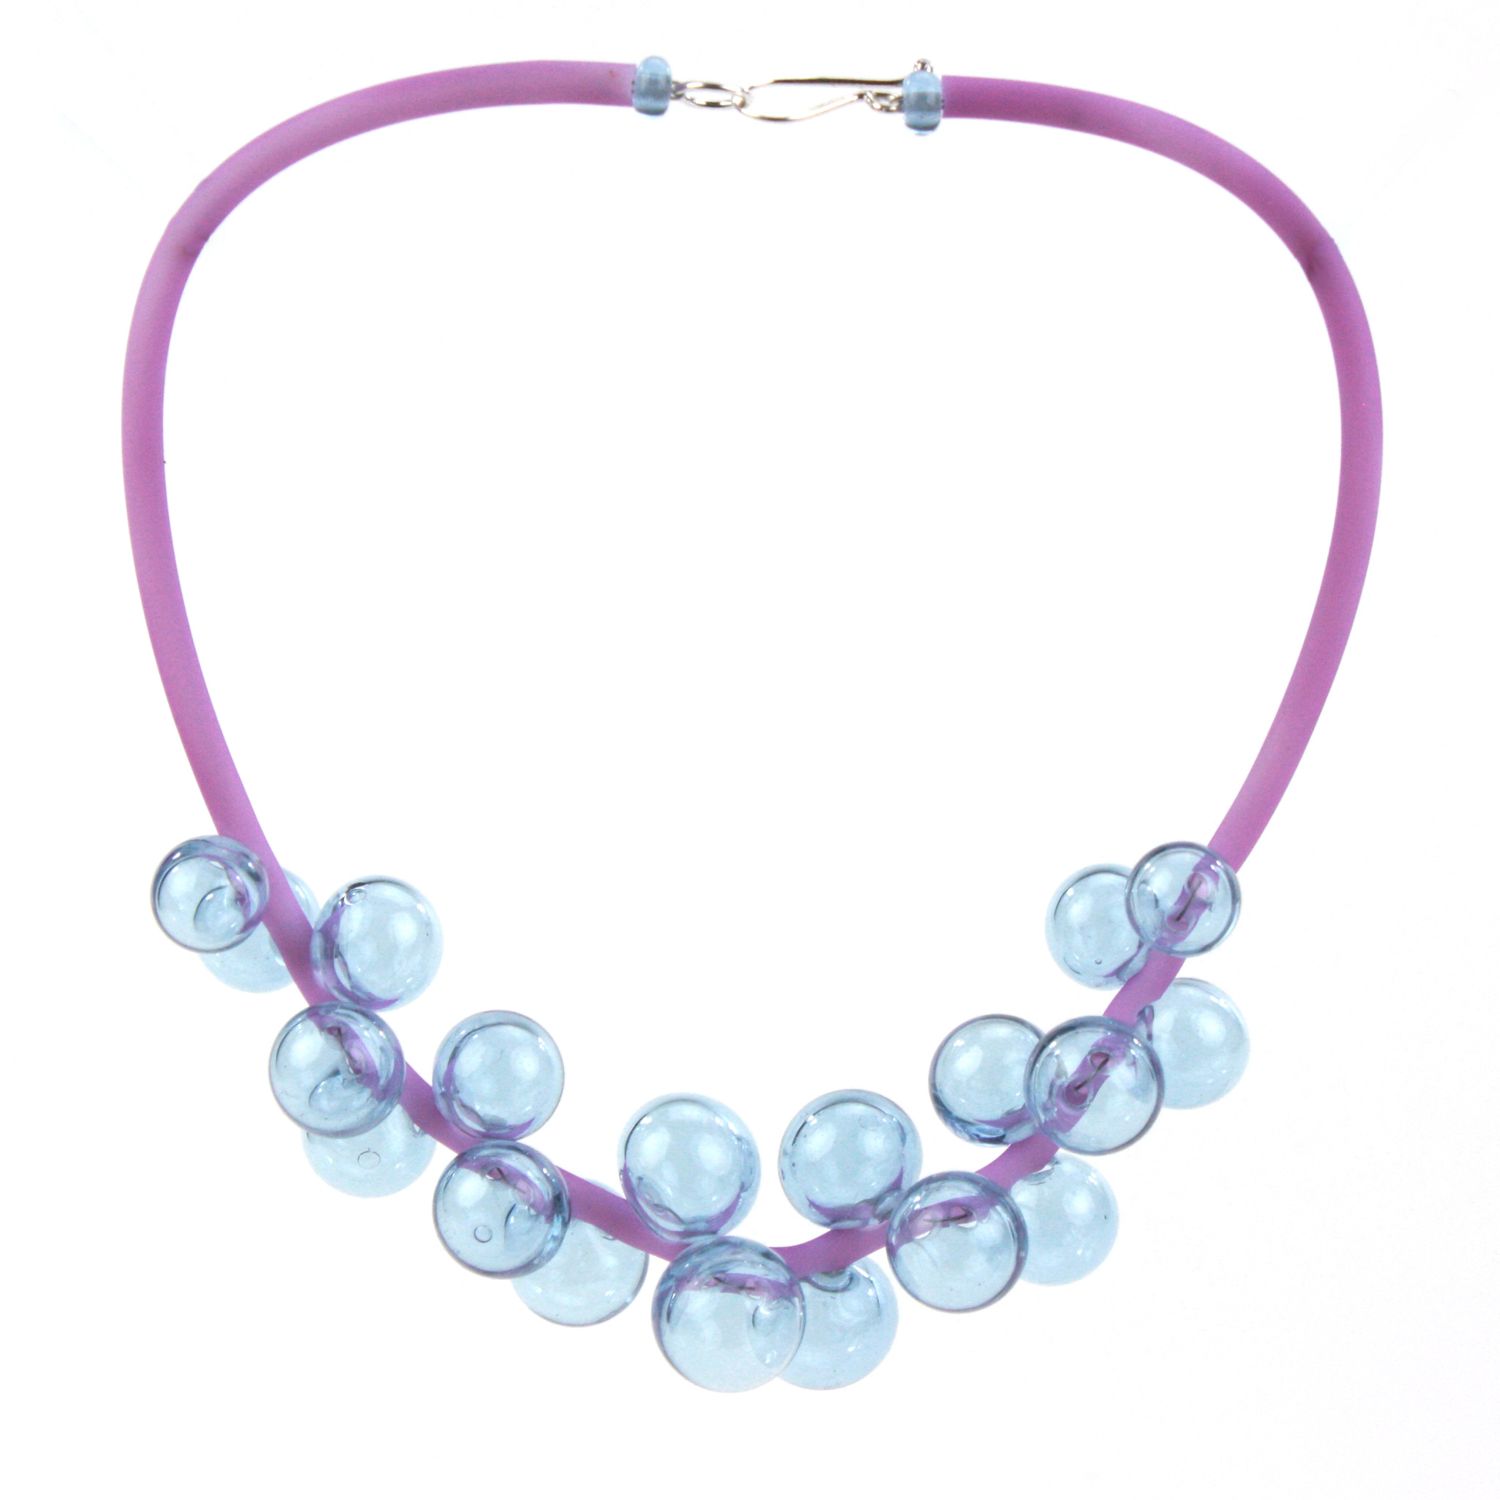 Alicia Niles: Chroma Bolla Necklace – Blue/Purple changing colour Product Image 1 of 6